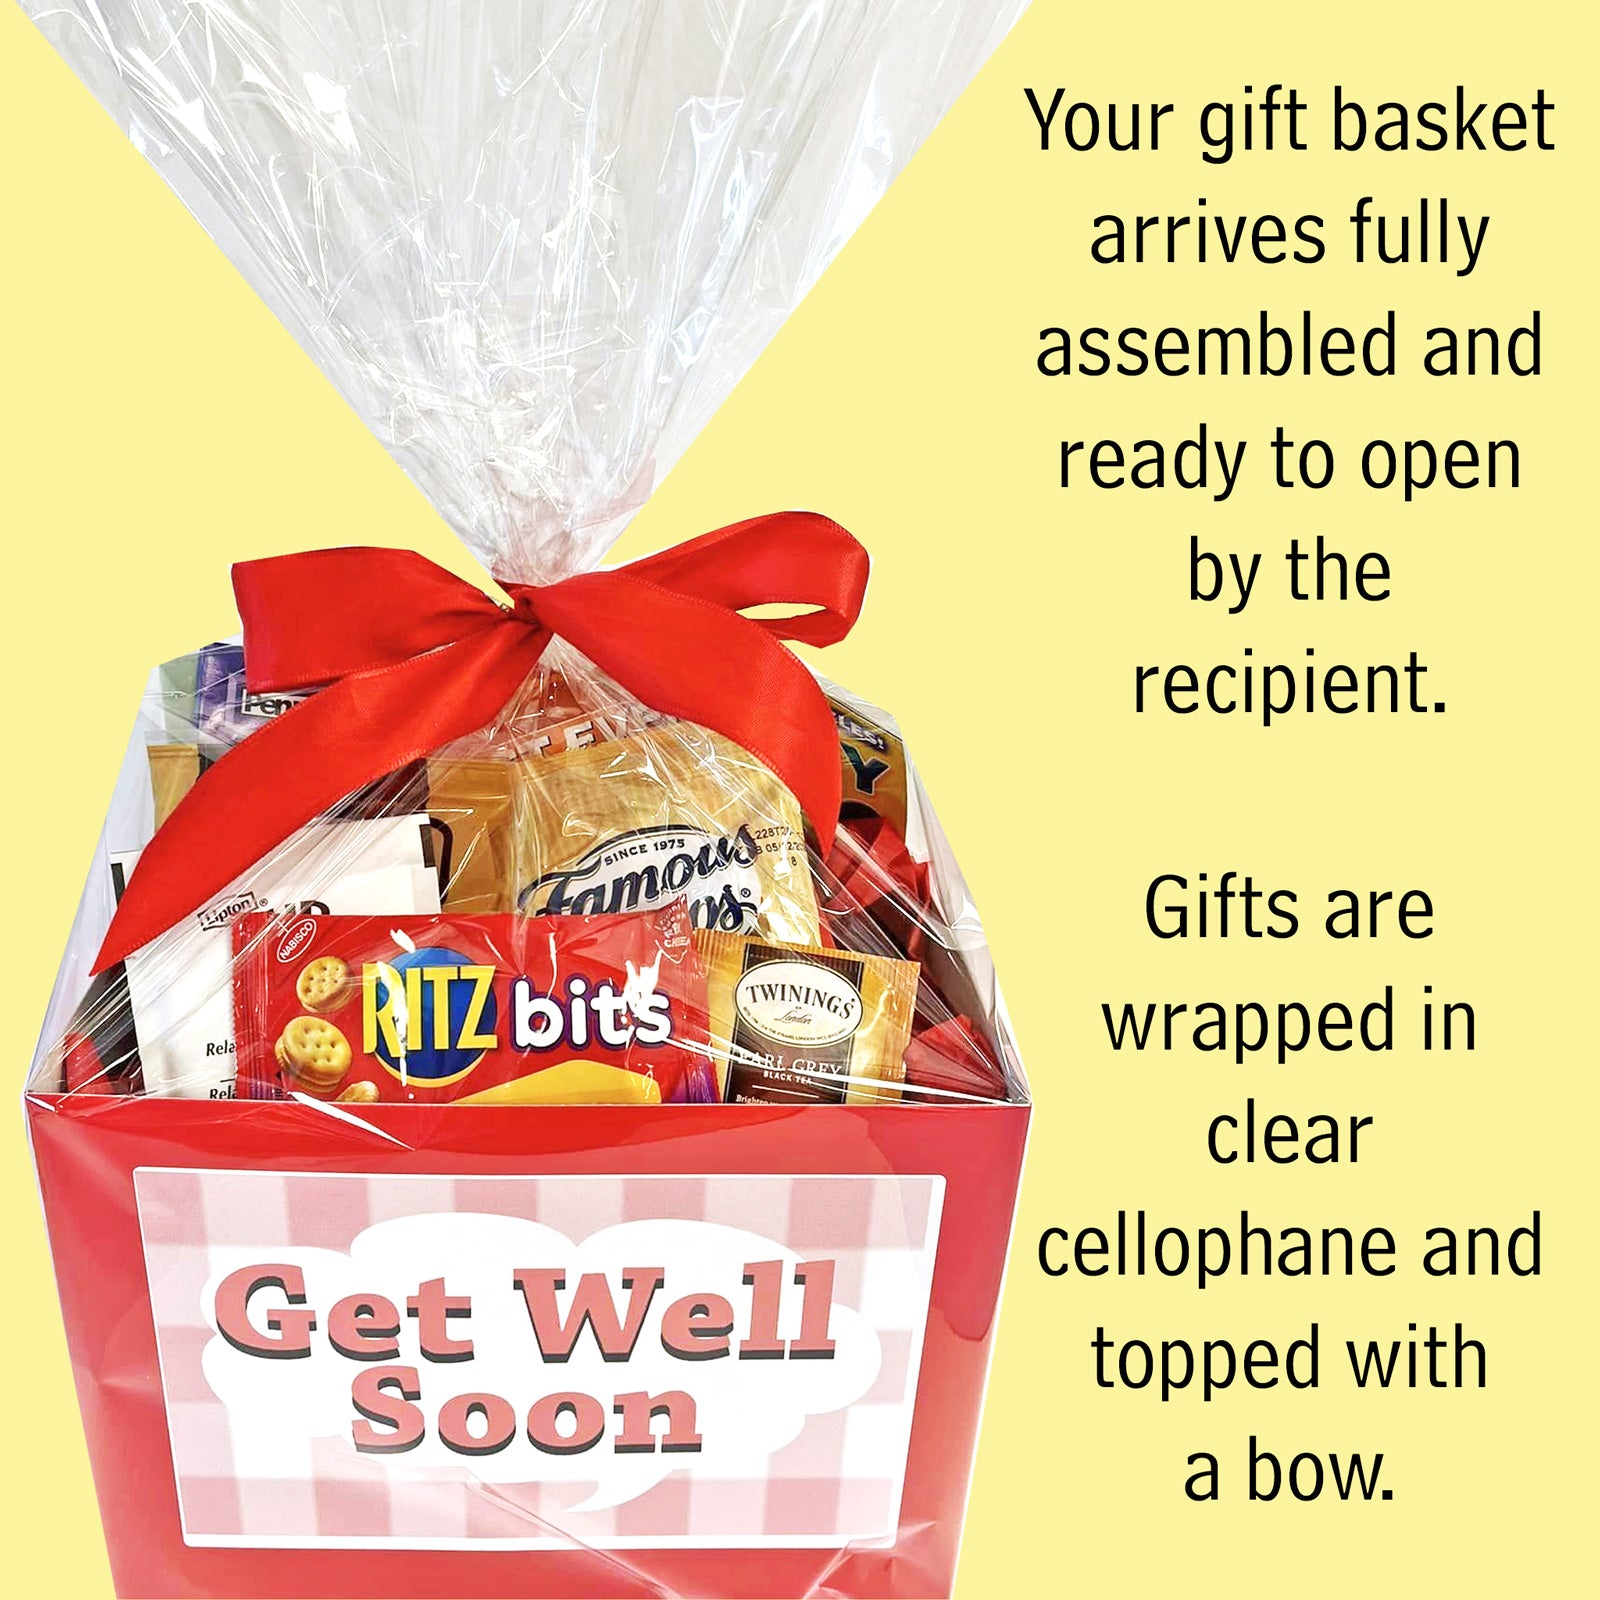 Comforting Get Well Gift Box has Puzzle Books and Snacks Unisex